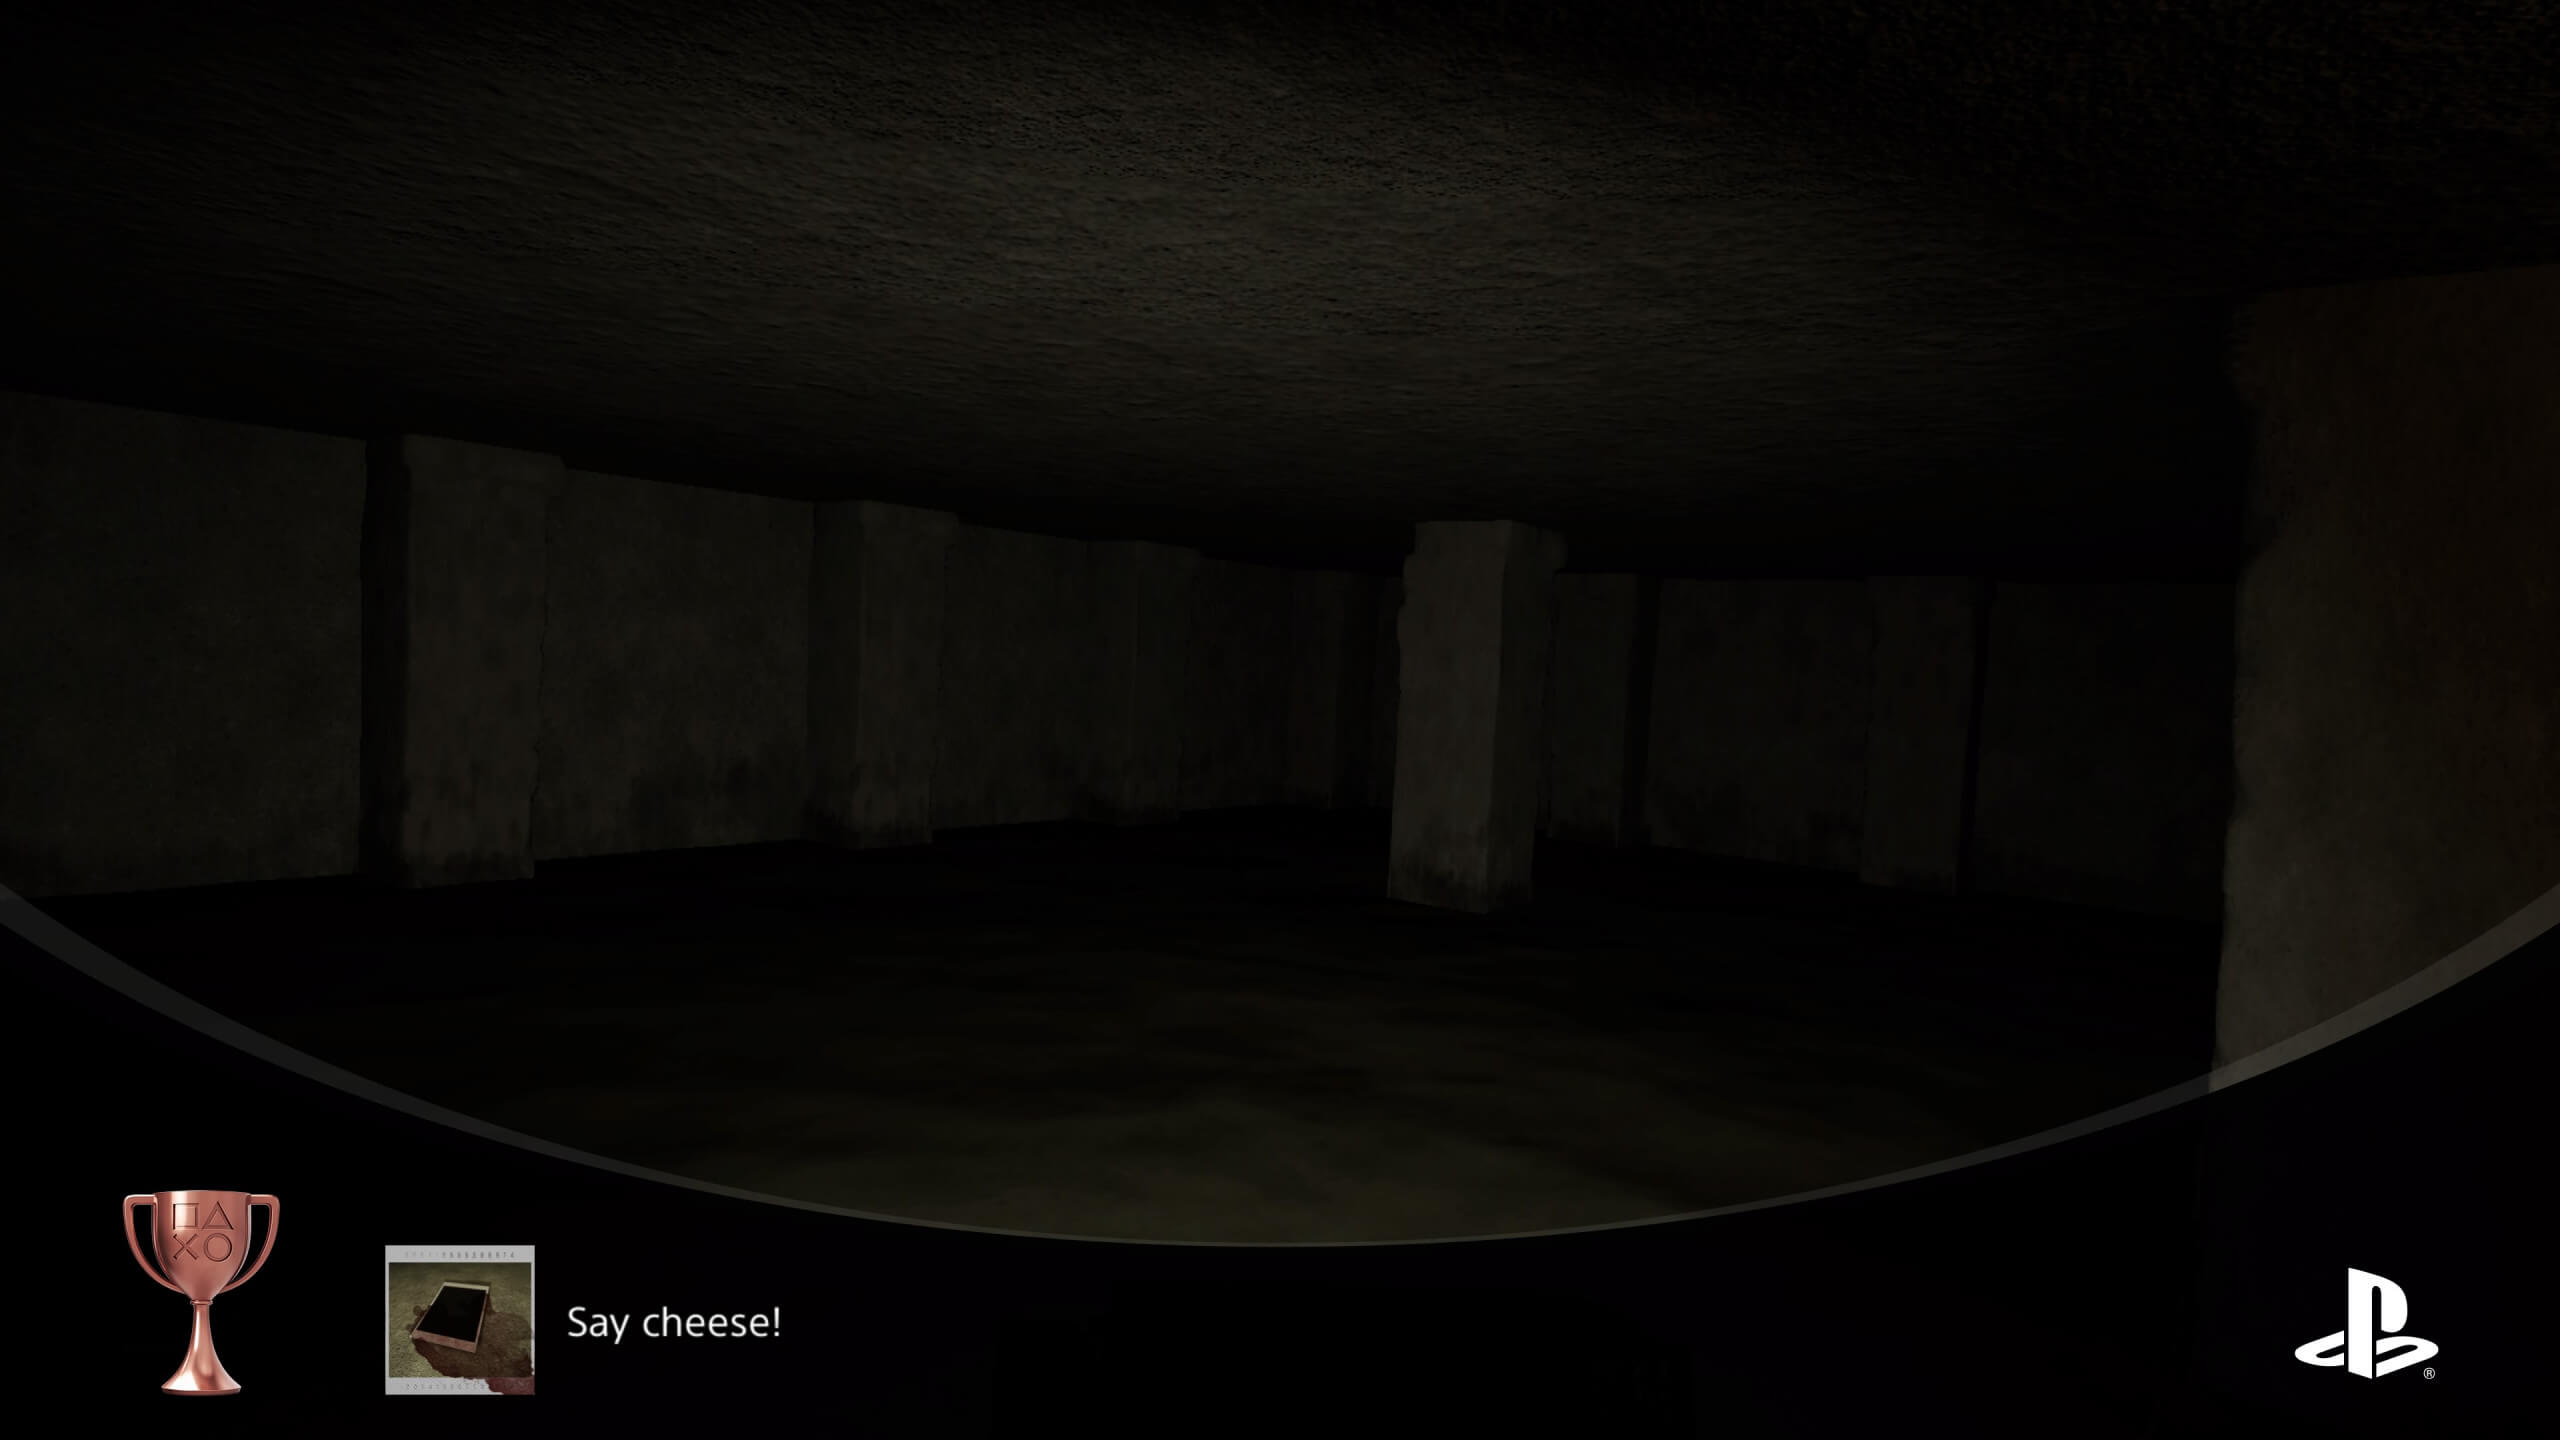 screenshot from Madison VR. say cheese achievement shown below and in the top right. the picture shows a small poorly lit room with water up to the waist and two white pillars supporting the ceiling.